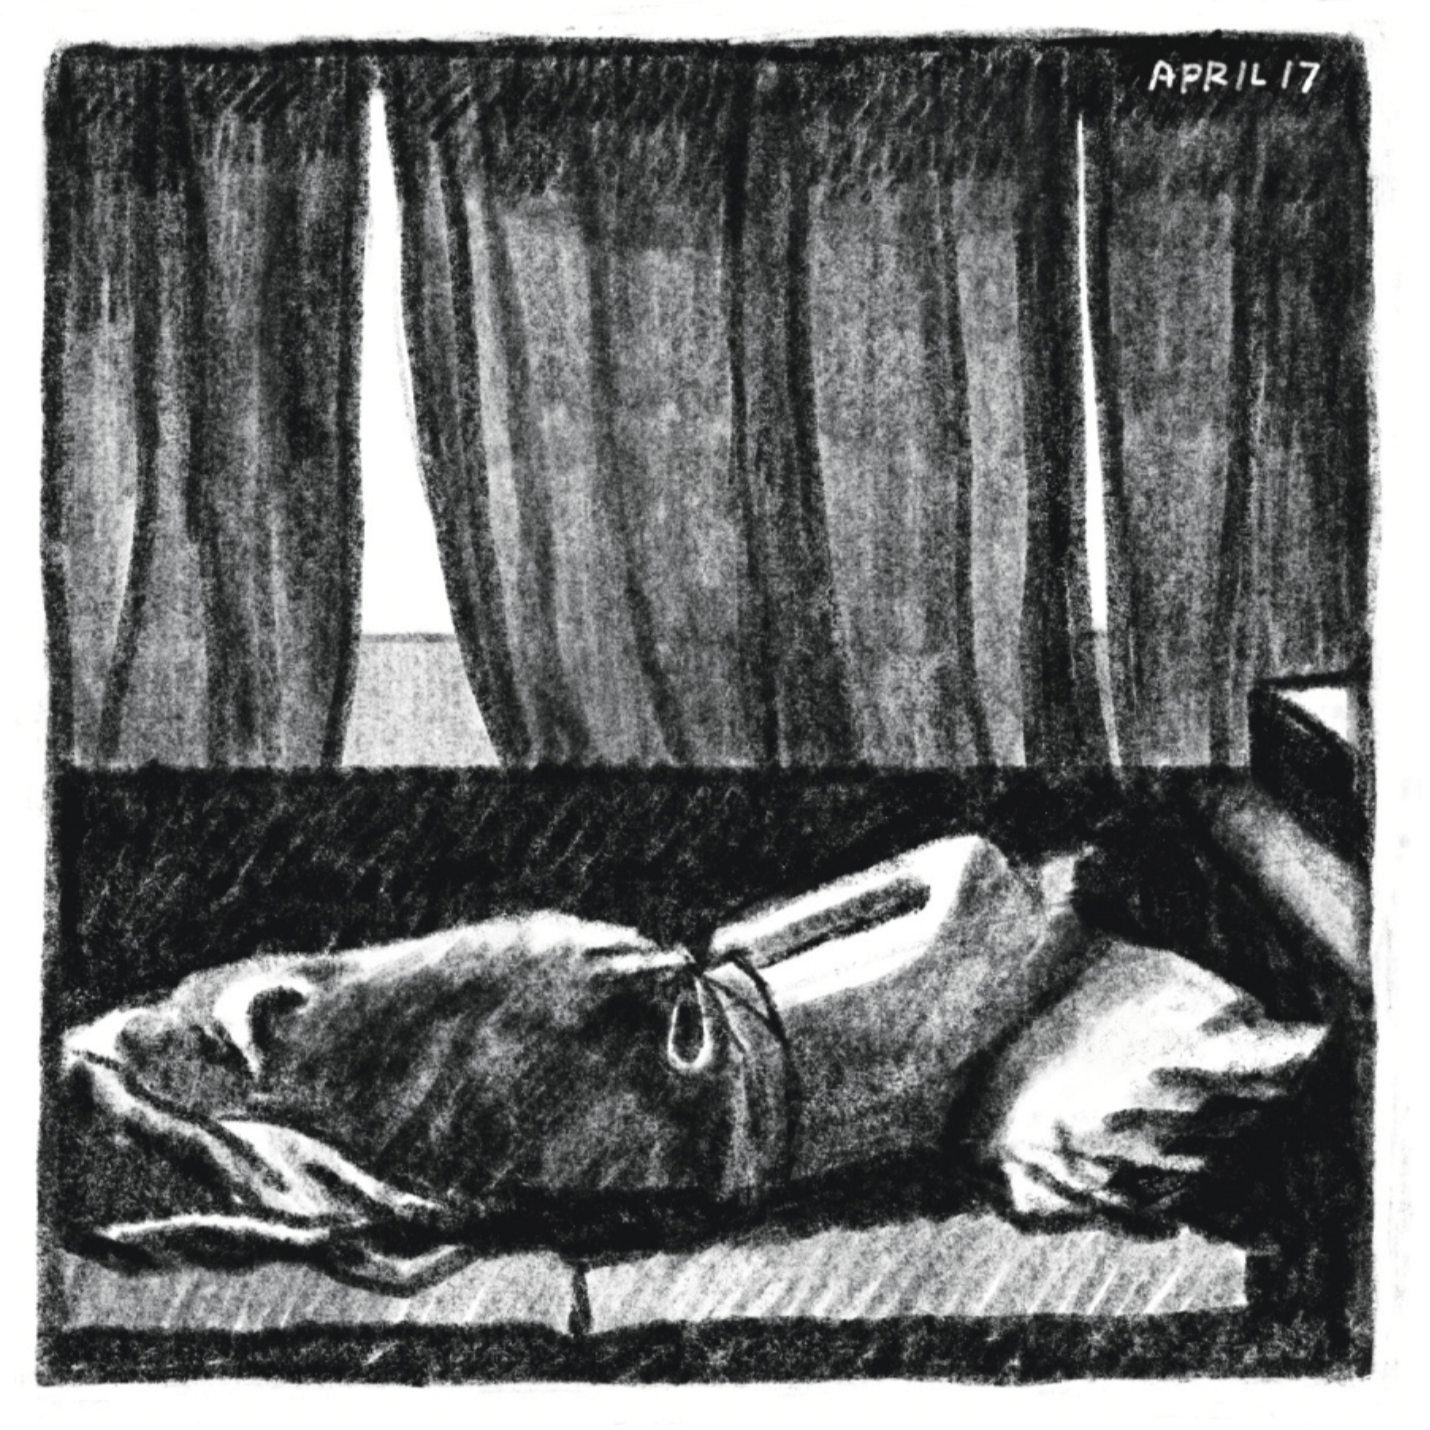 Someone sleeps on their side in bed. They are shirtless, and their legs are wrapped in a blanket. The room is dark - the curtains are almost entirely closed and blocking out the sun.

"April 17."